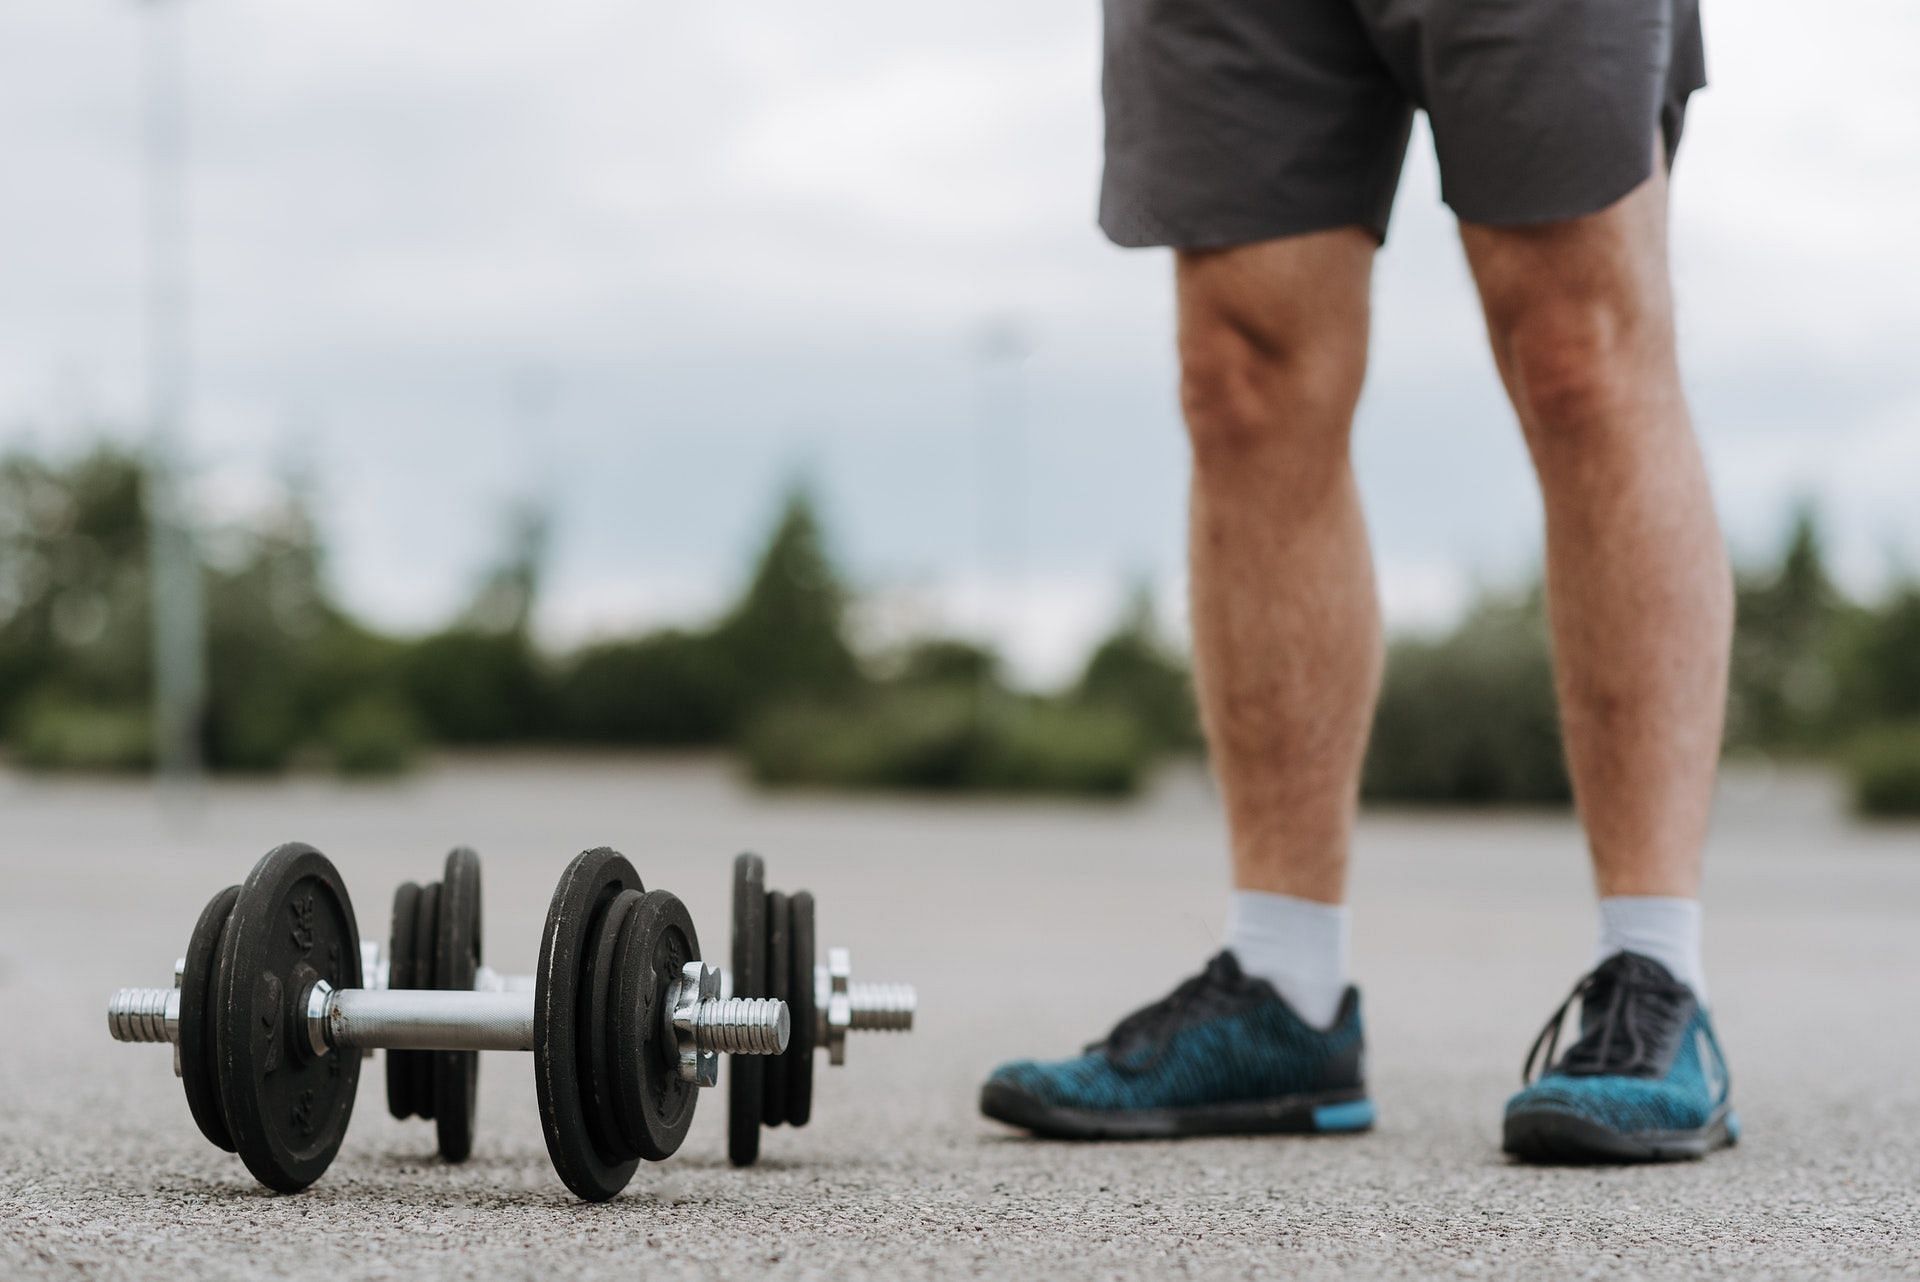 Standing calf raises help strengthen the lower leg muscles. Photo by Anete Lusina via pexels)